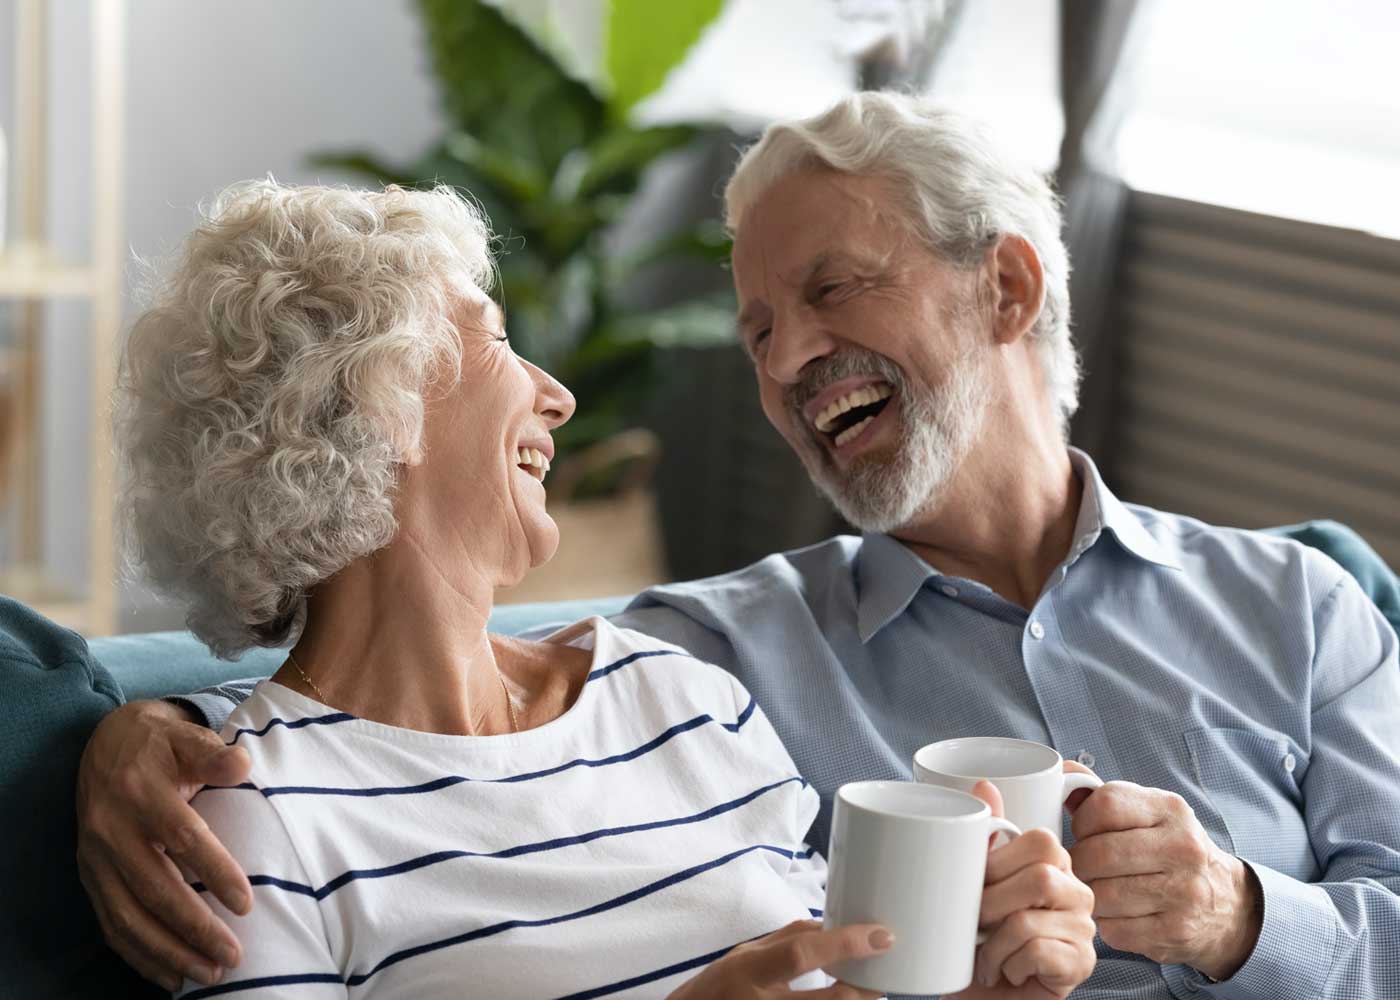 Older couple laughing together, holding mugs on couch